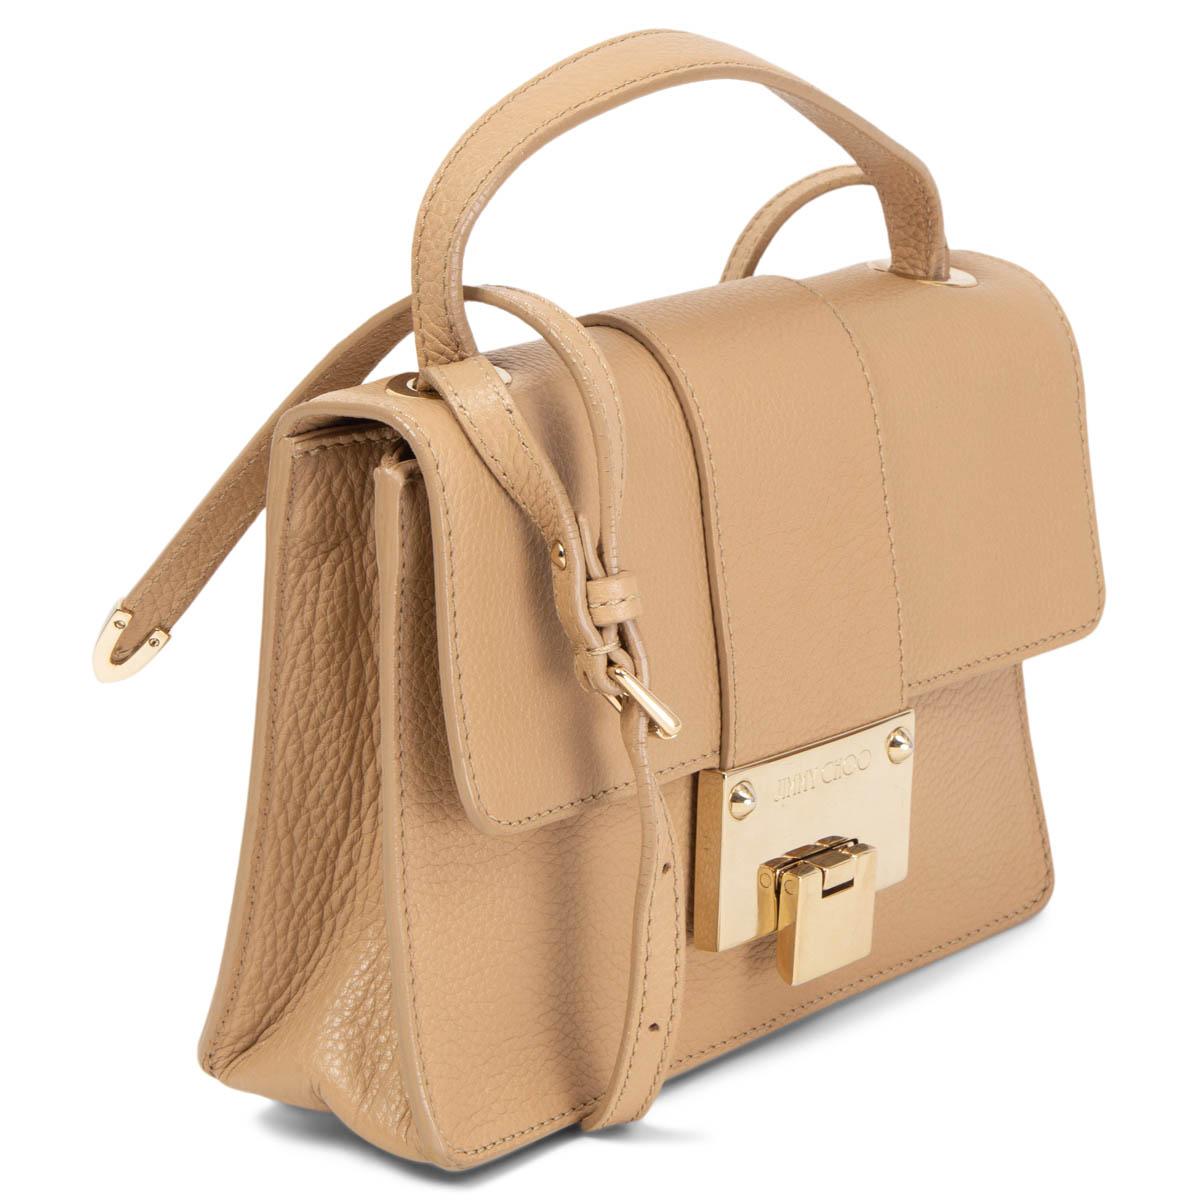 100% authentic Jimmy Choo Rebel Crossbody Bag in grained sand calfskin and light gold-tone hardware. Lined in beige alcantara with one patch pocket against the back. Comes with an adjustable shoulder-strap and top-handle. Has been carried and is in